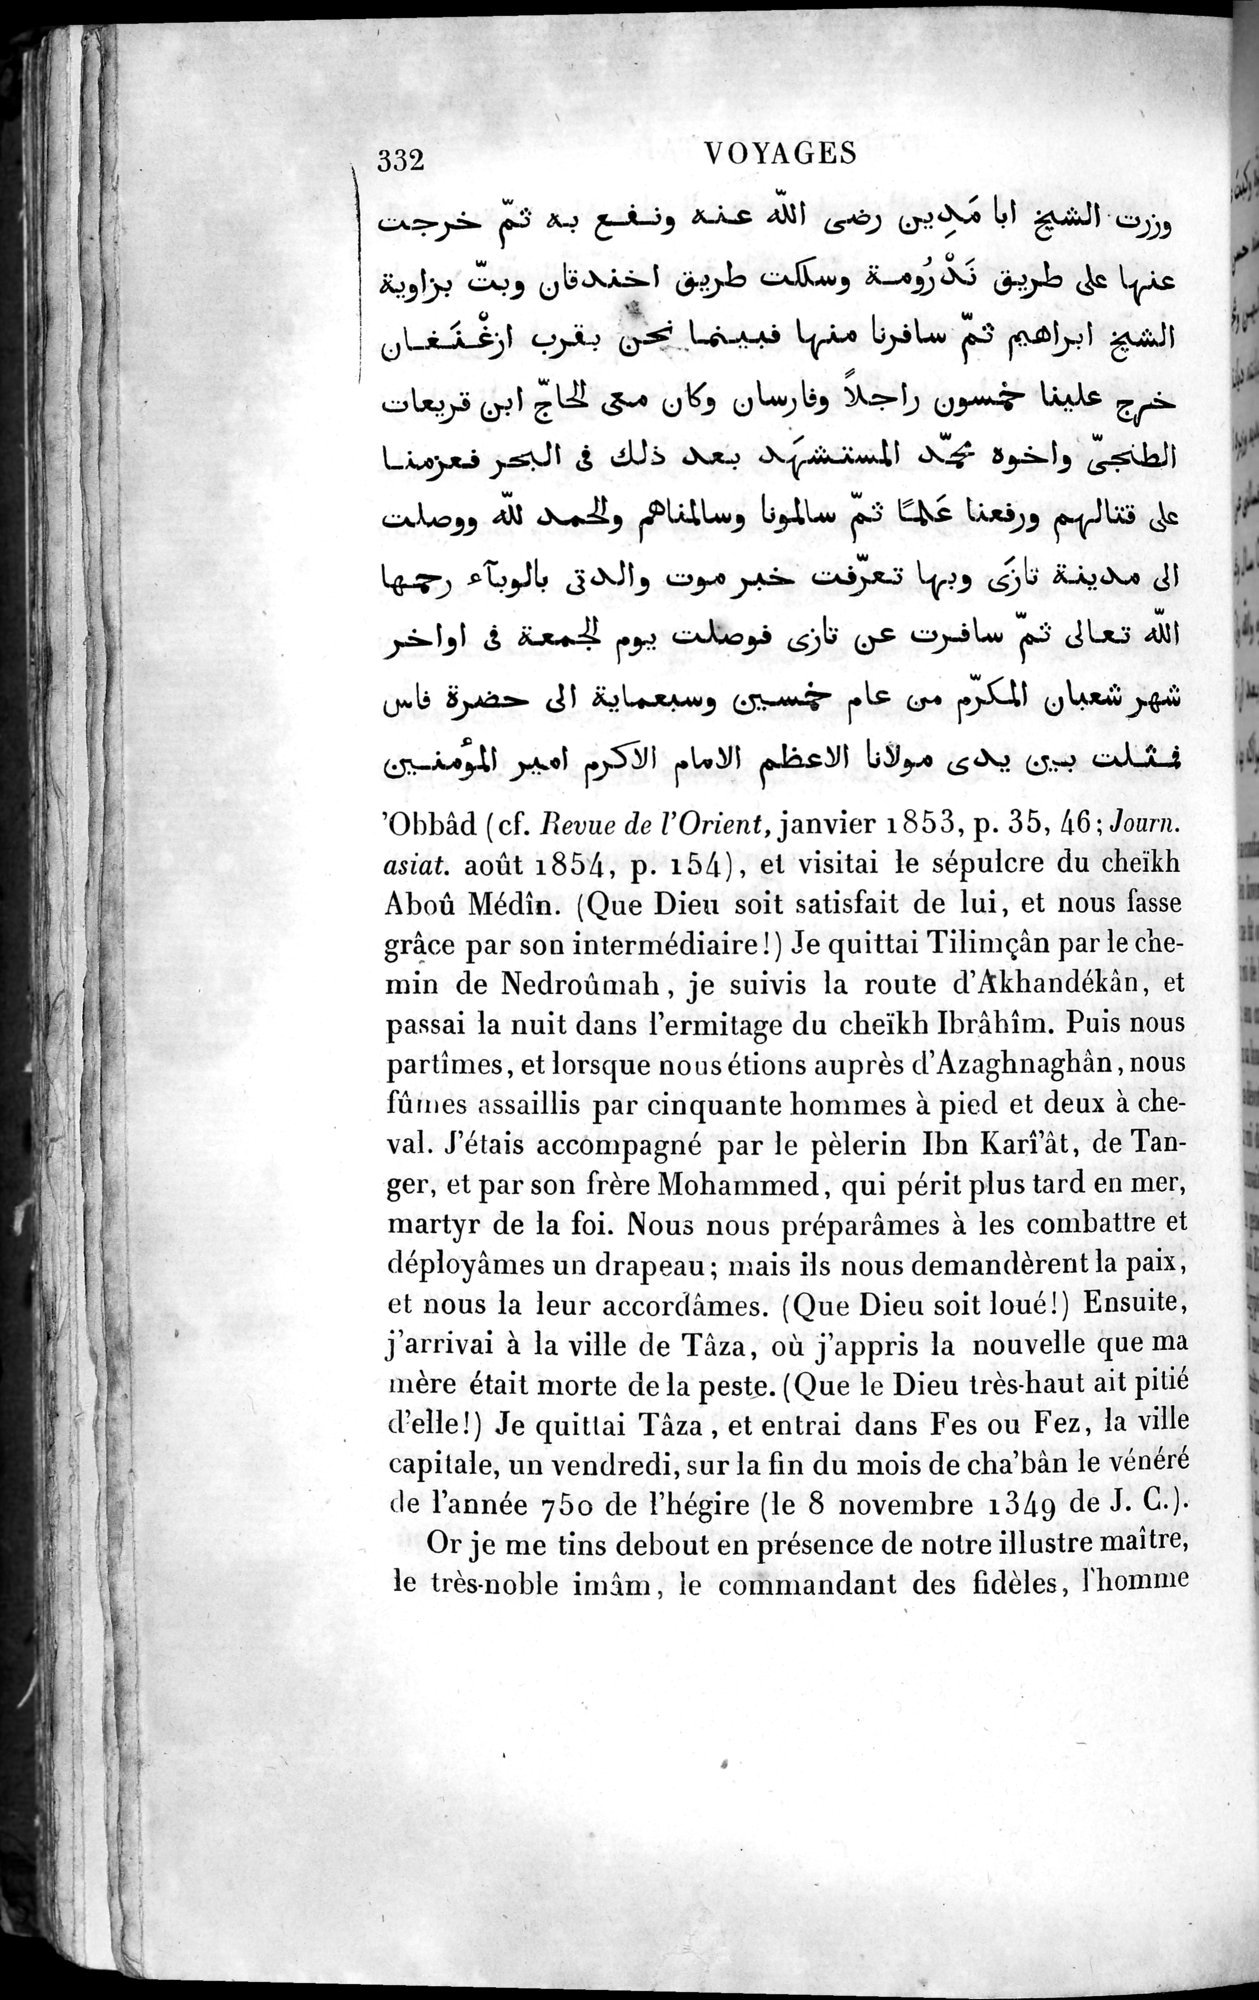 Voyages d'Ibn Batoutah : vol.4 / Page 344 (Grayscale High Resolution Image)